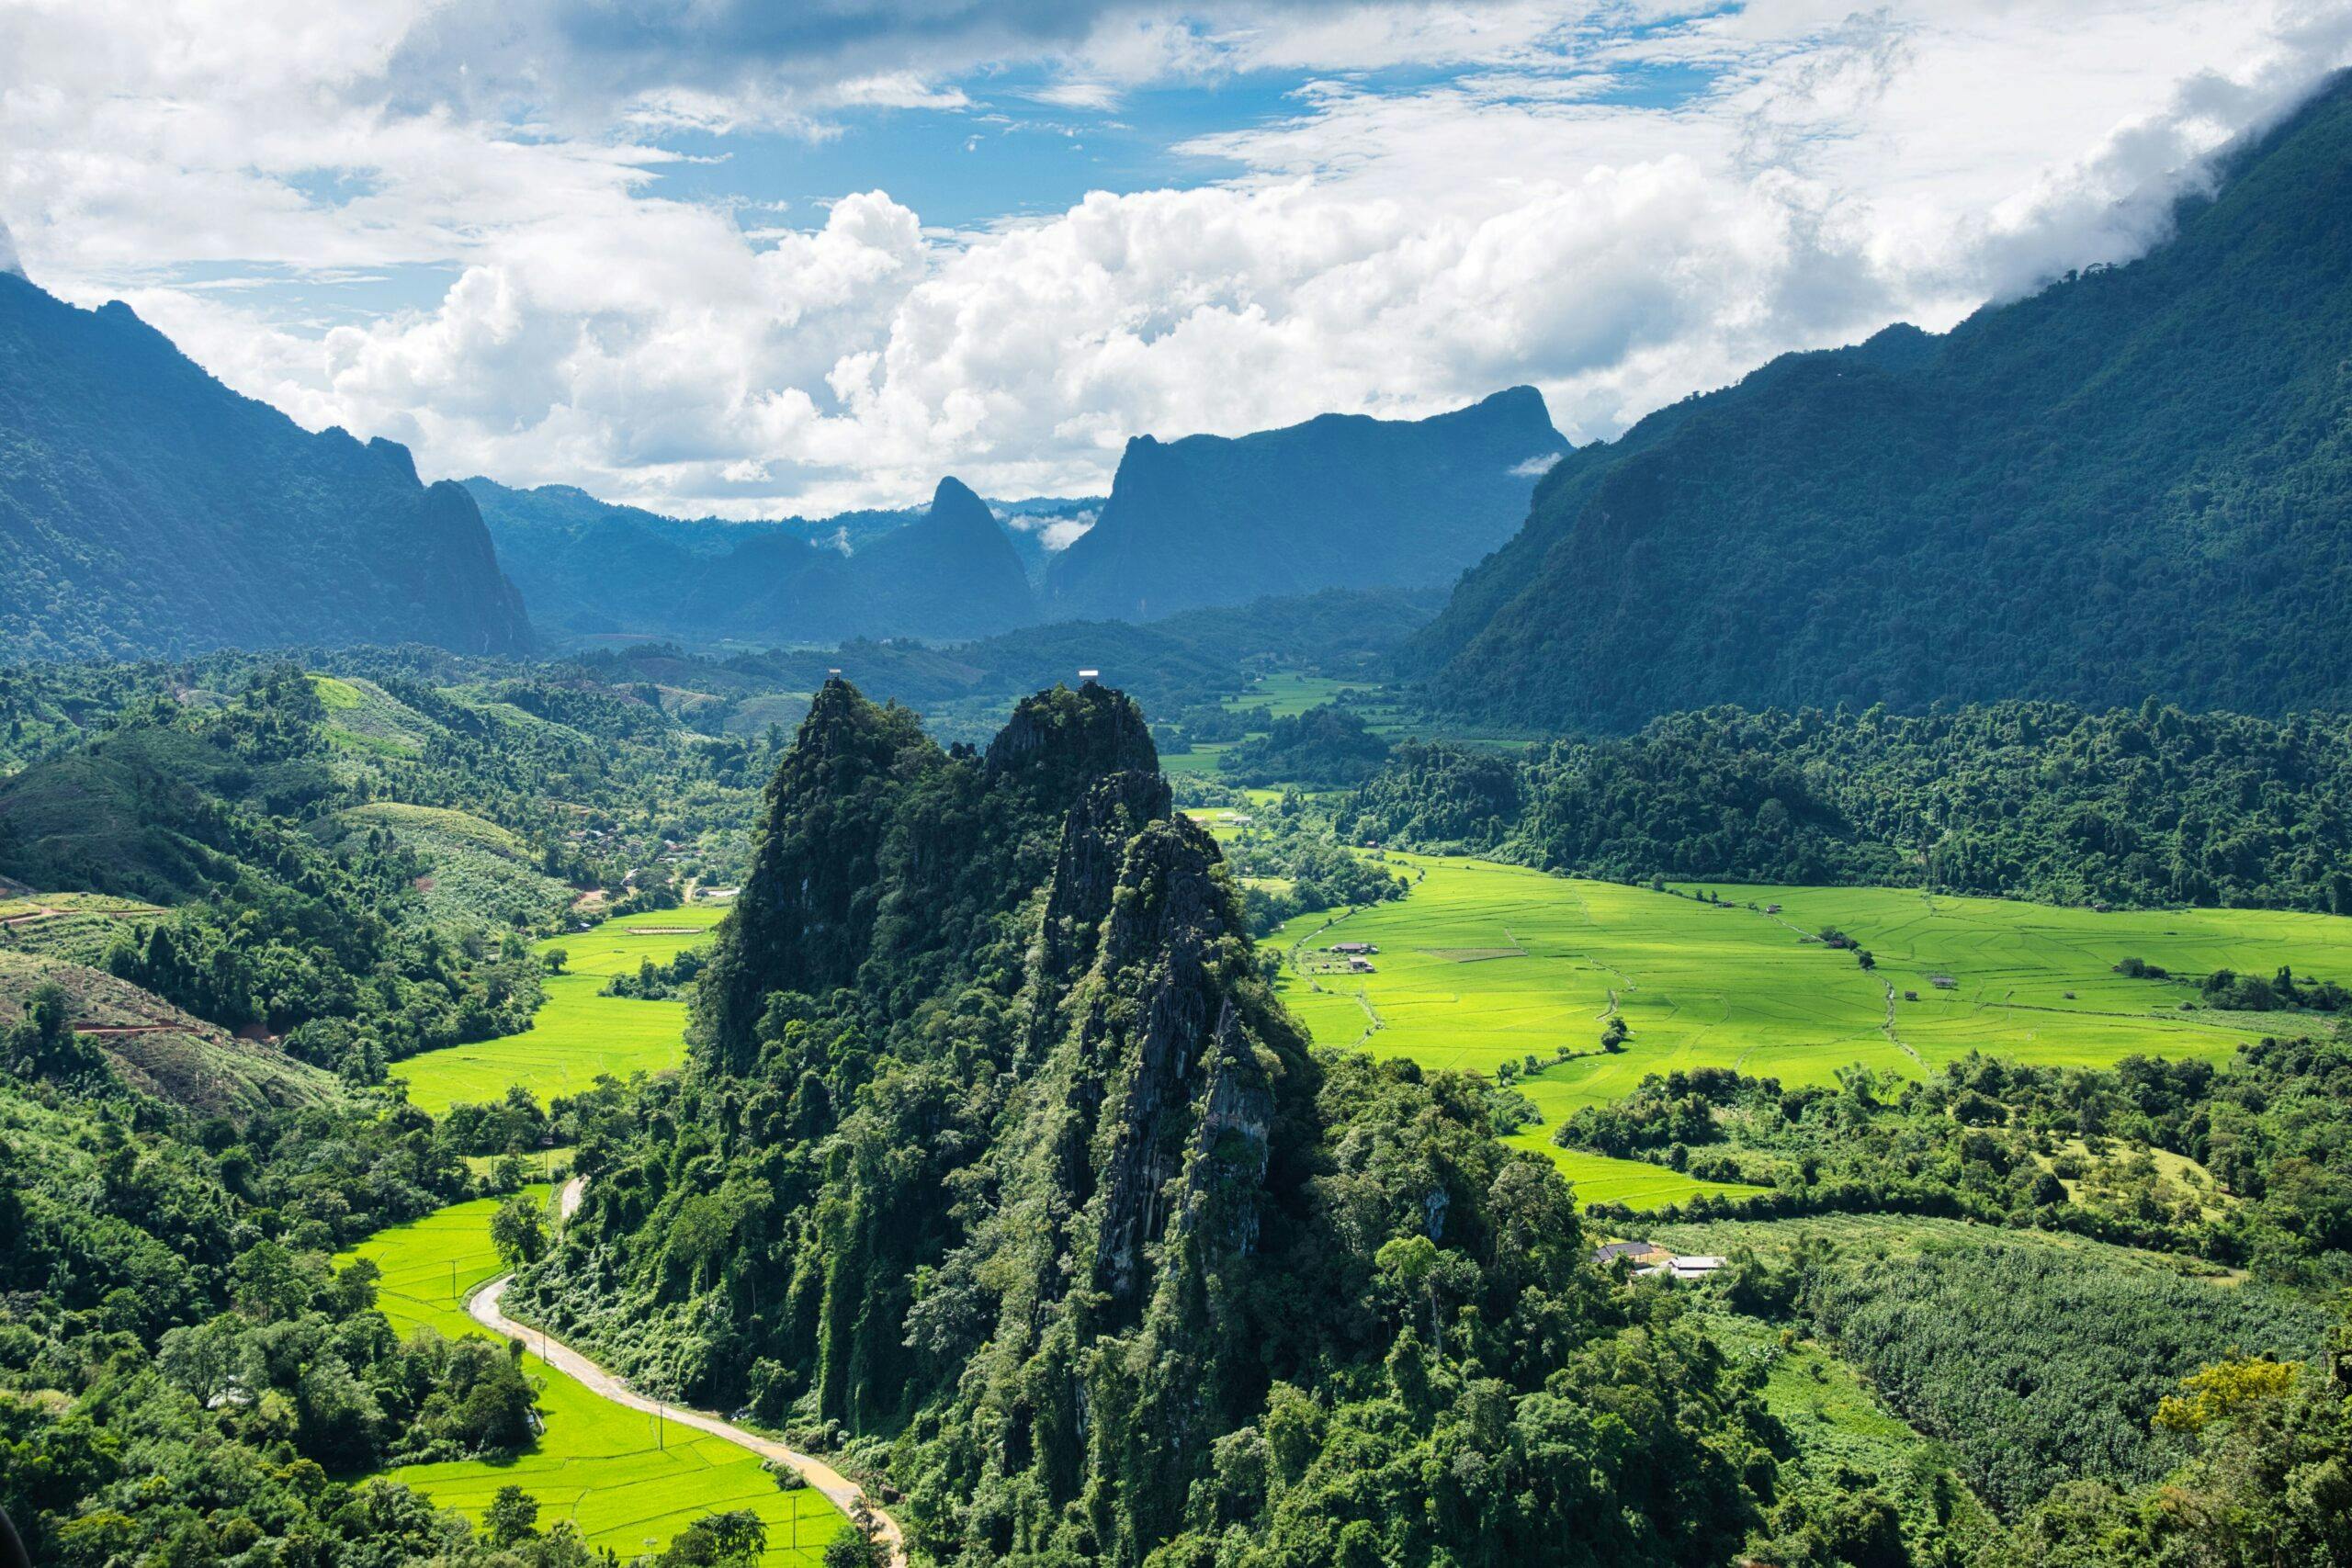 We're reimagining a fairer way to visit Laos